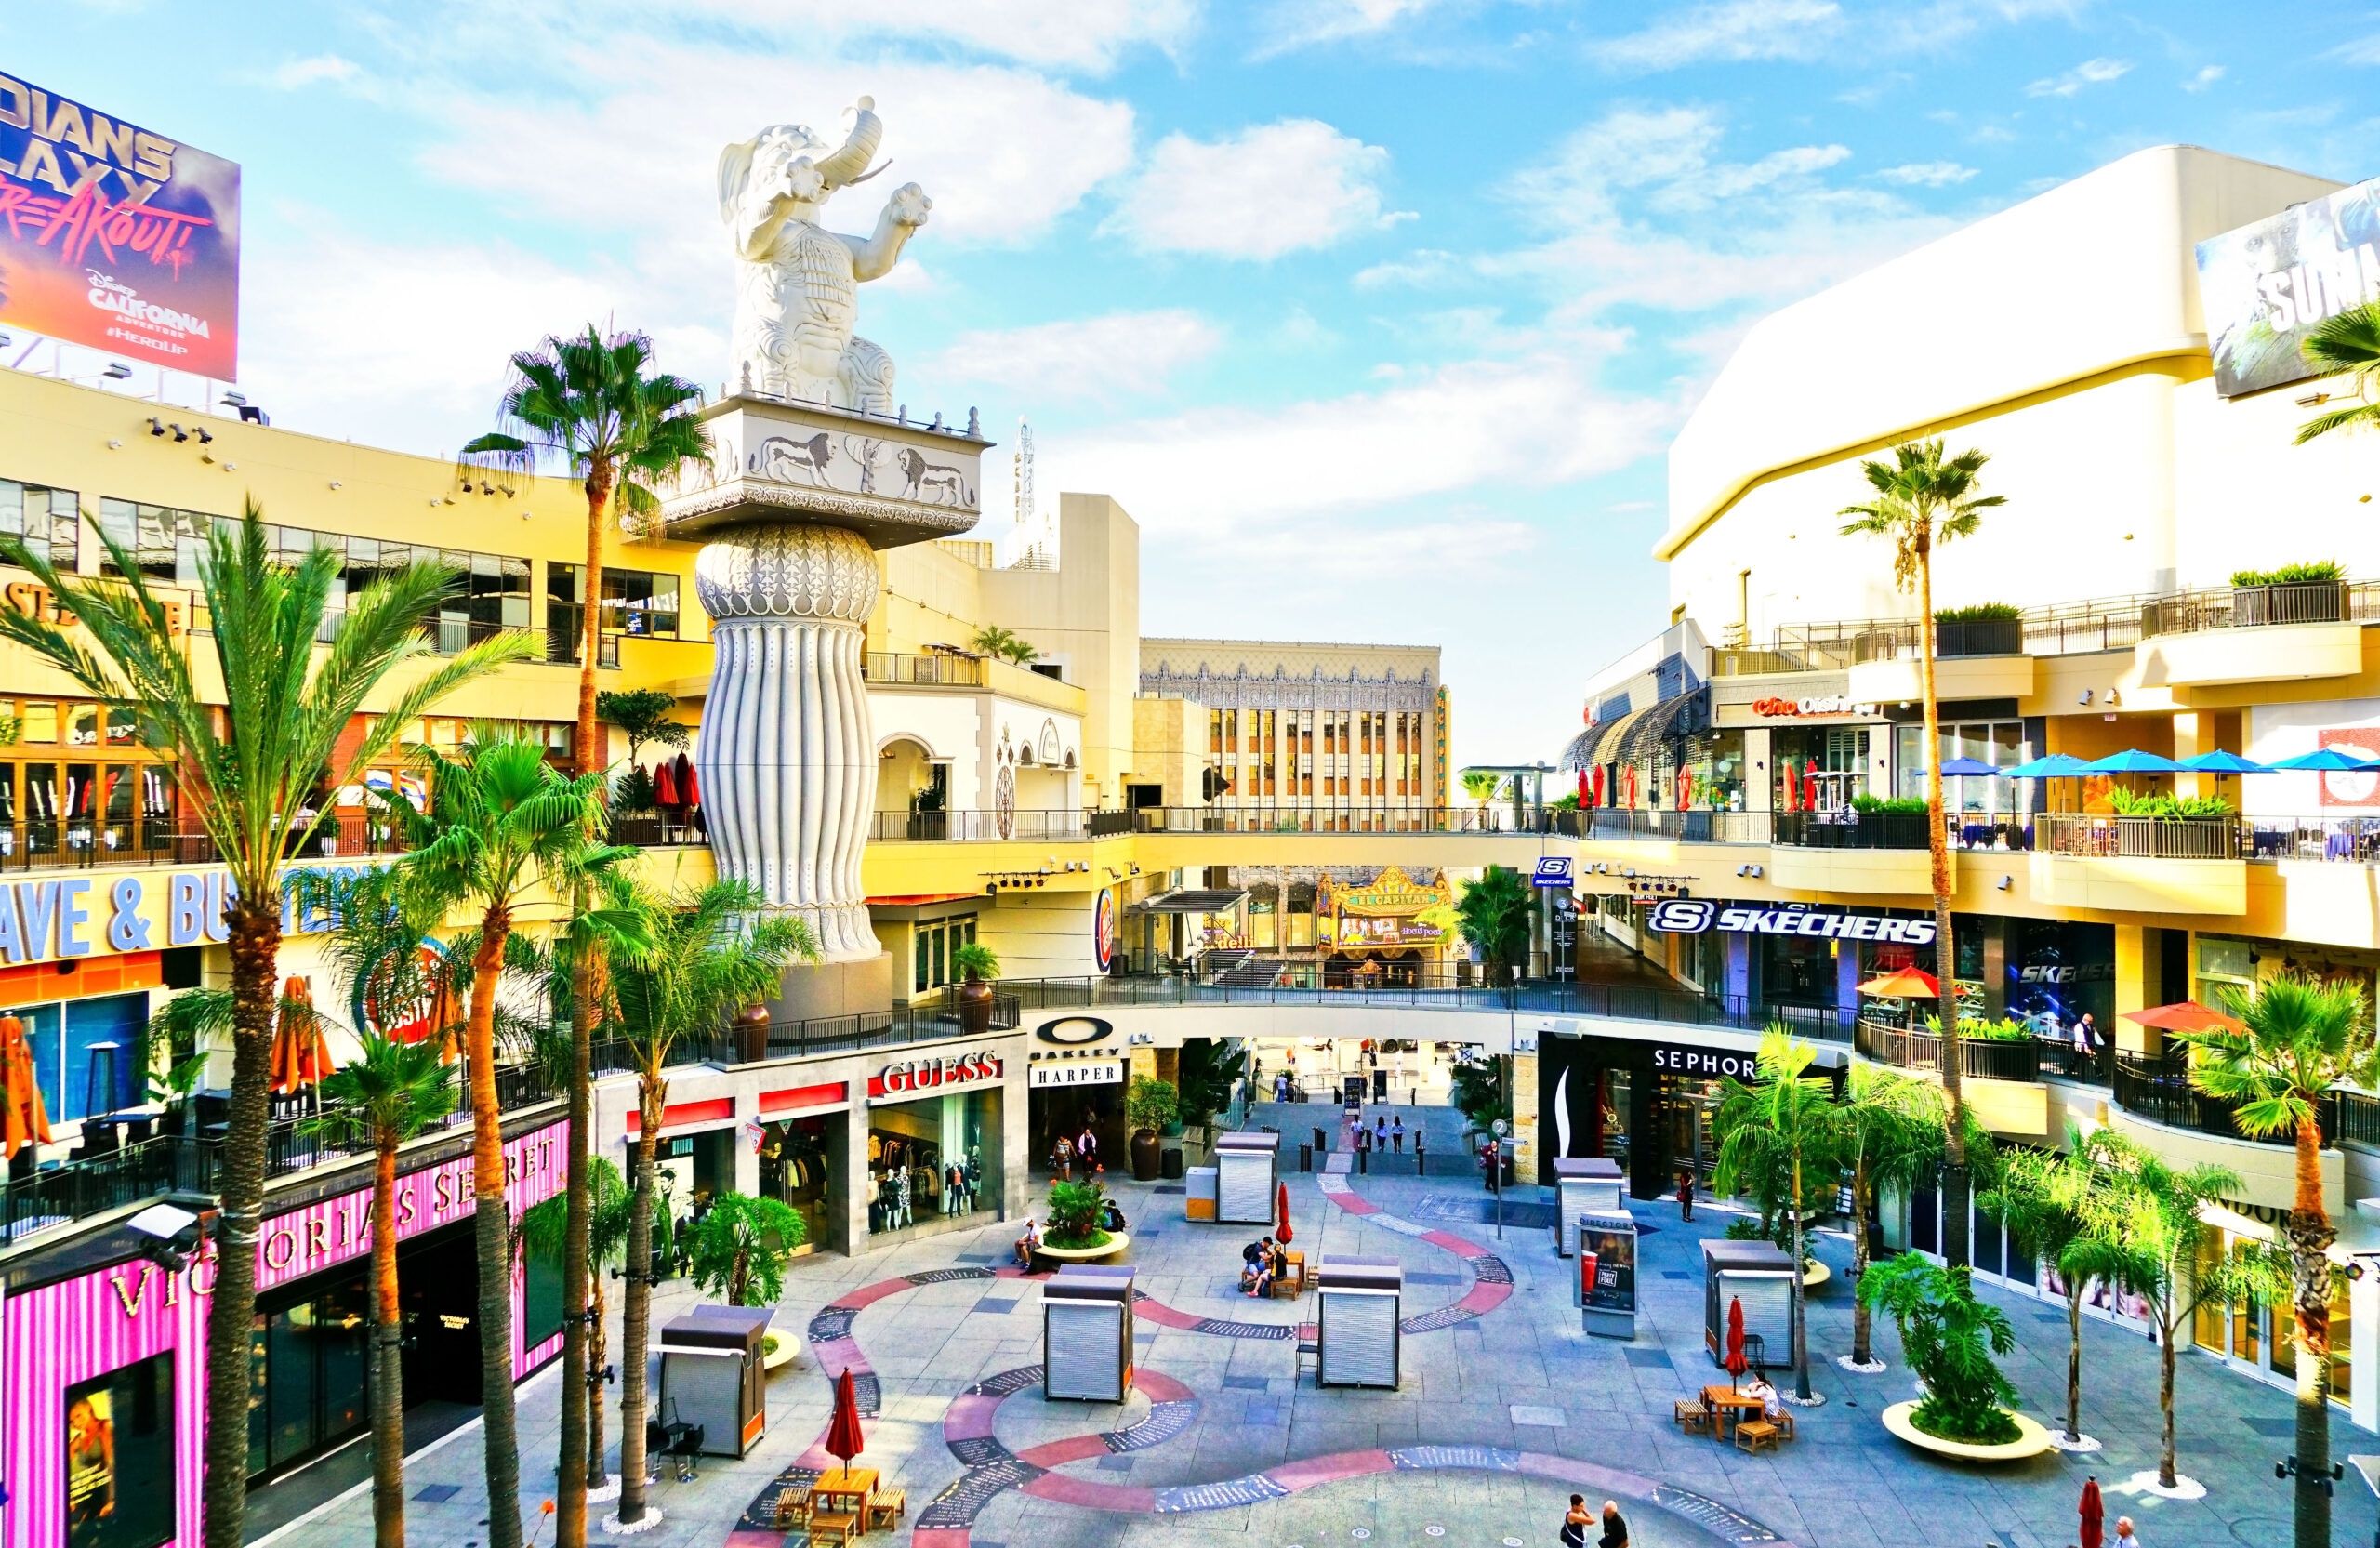 A beautiful mall in the city of the Los Angeles